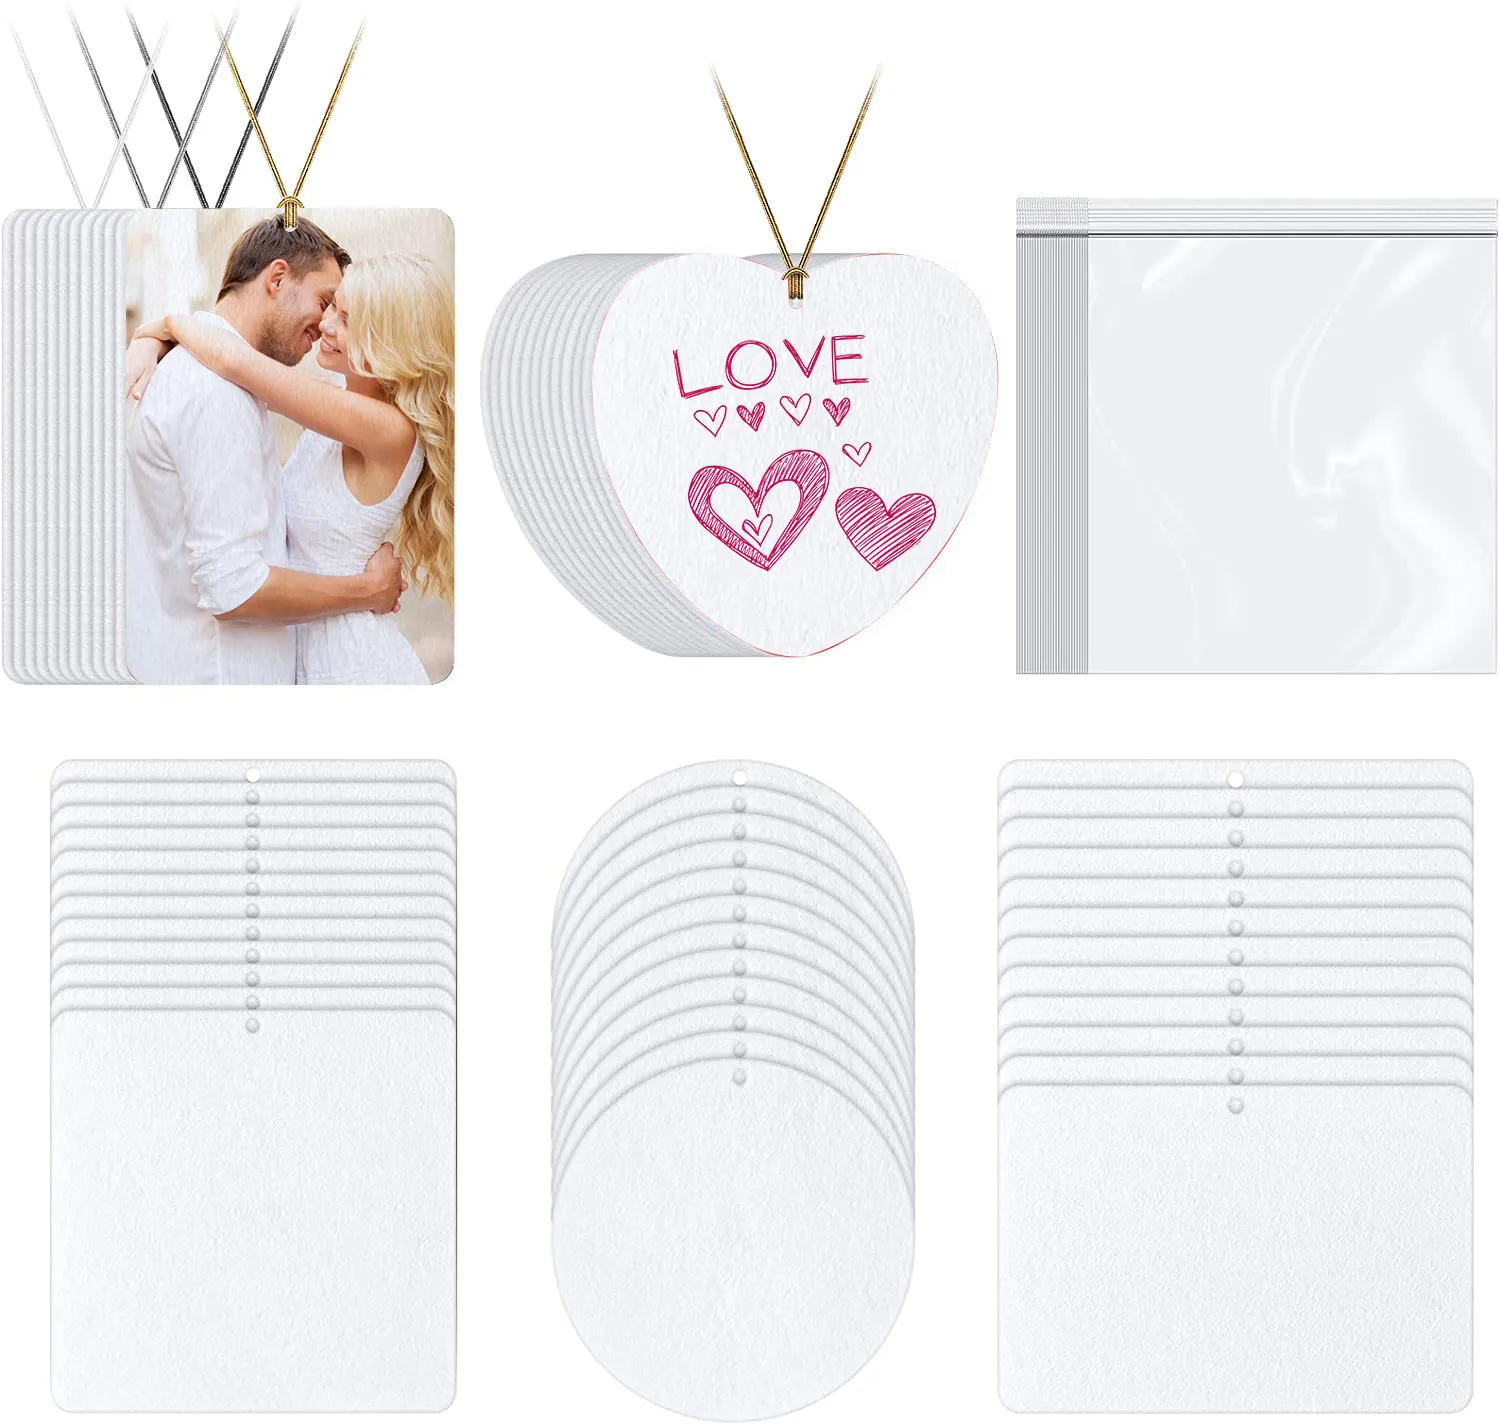 Sublimation Blank Air Freshener Essential Oils Diffusers Felt Material  Sheet White Unscented Home Fragrances Car Air Fresheners With String From  Hx_zaka, $0.1